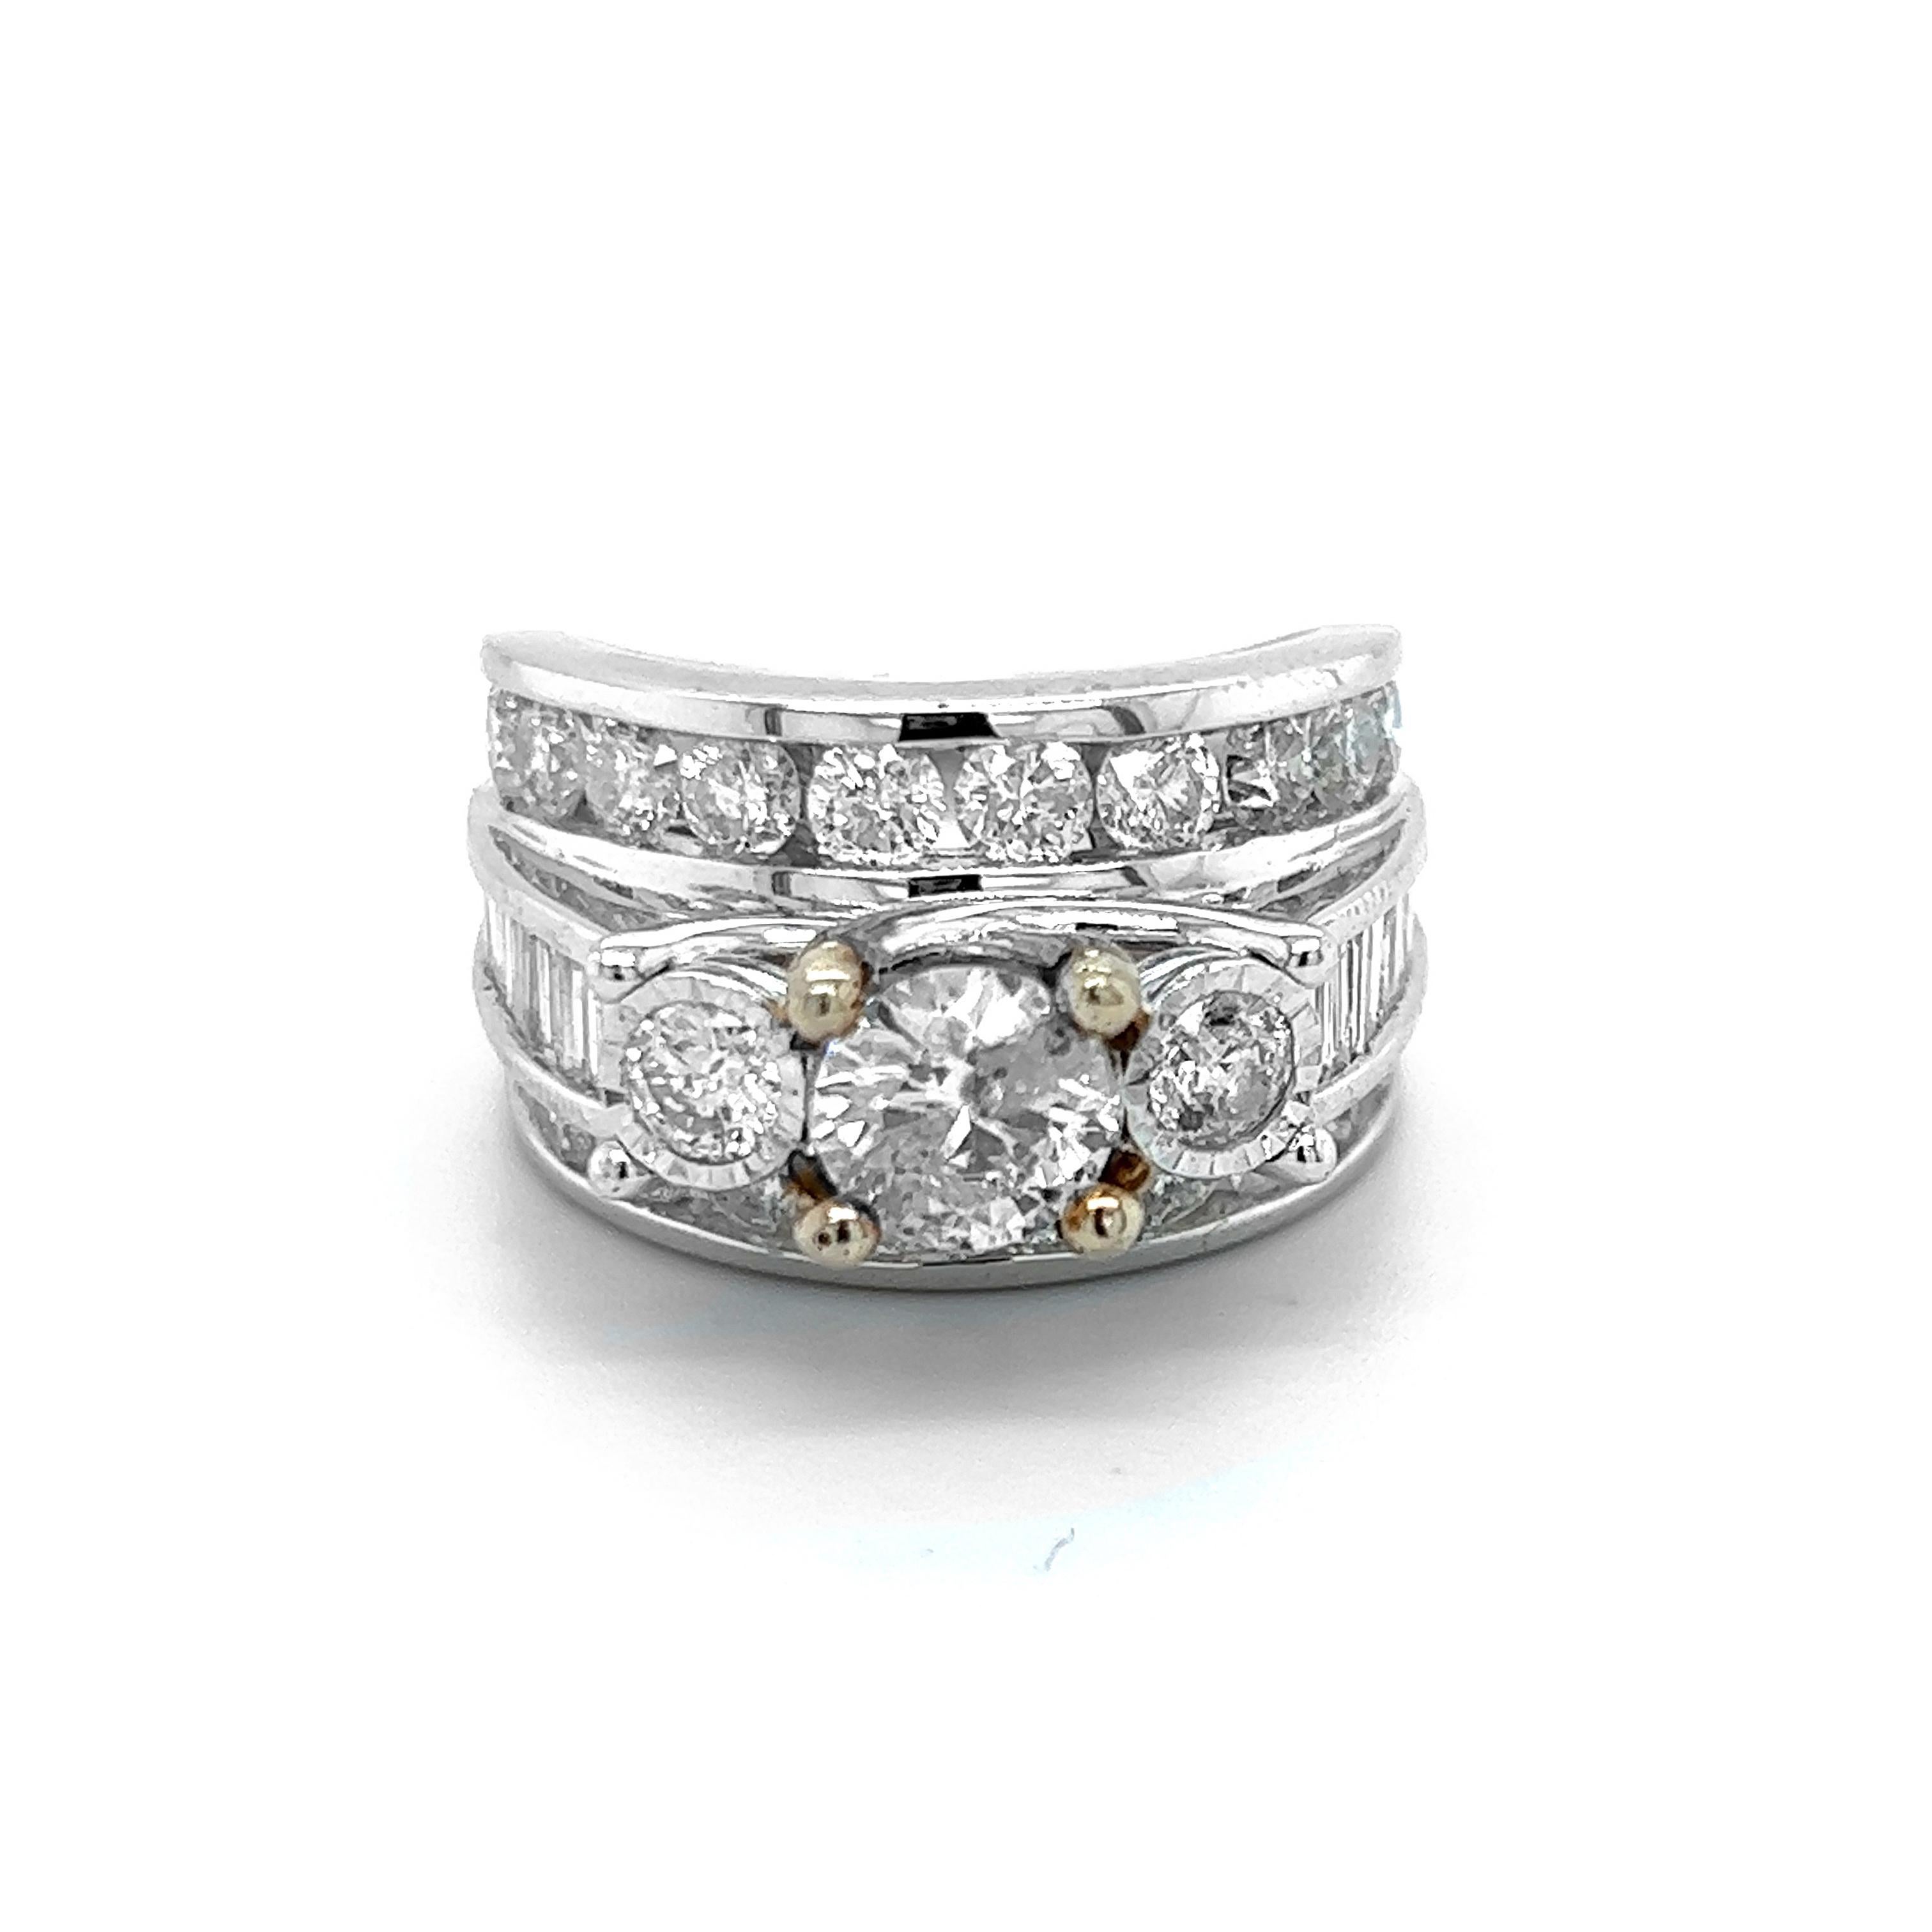 14K White Yellow Gold Round and Baugette Diamonds Cocktail Ring

Diamonds weigh apprx. 4.80 ct. Diamonds range from H, I, J color, SI1-I2 clarity.

Center diamond is apprx. 1 carat with two 0.40ct. diamonds on each side.

Baguette diamonds are set